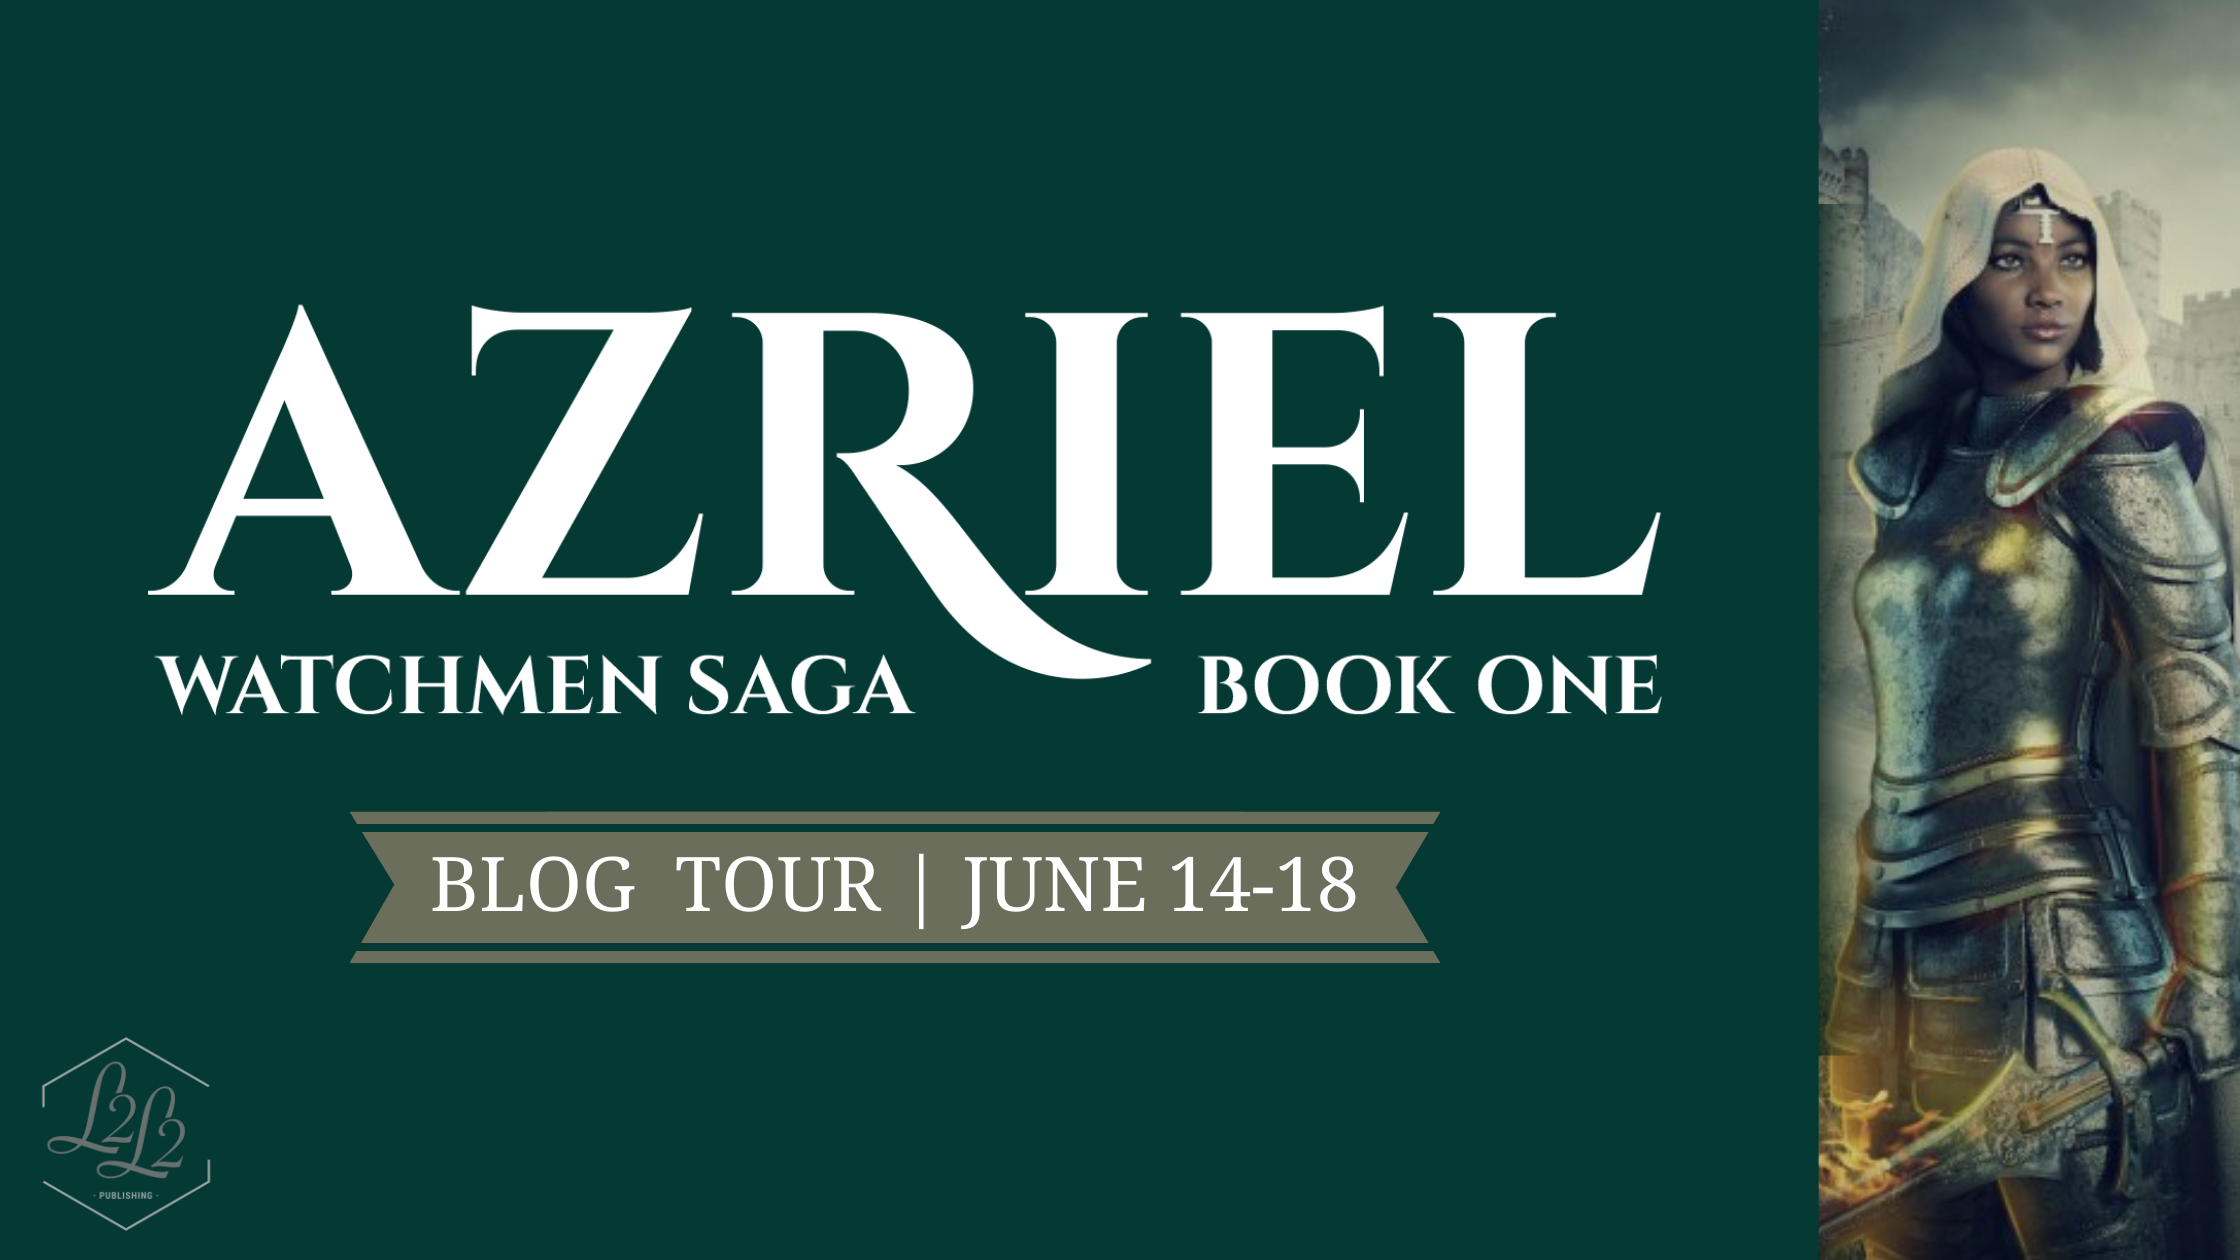 So Excited to Celebrate New Book Azriel by Lee James!